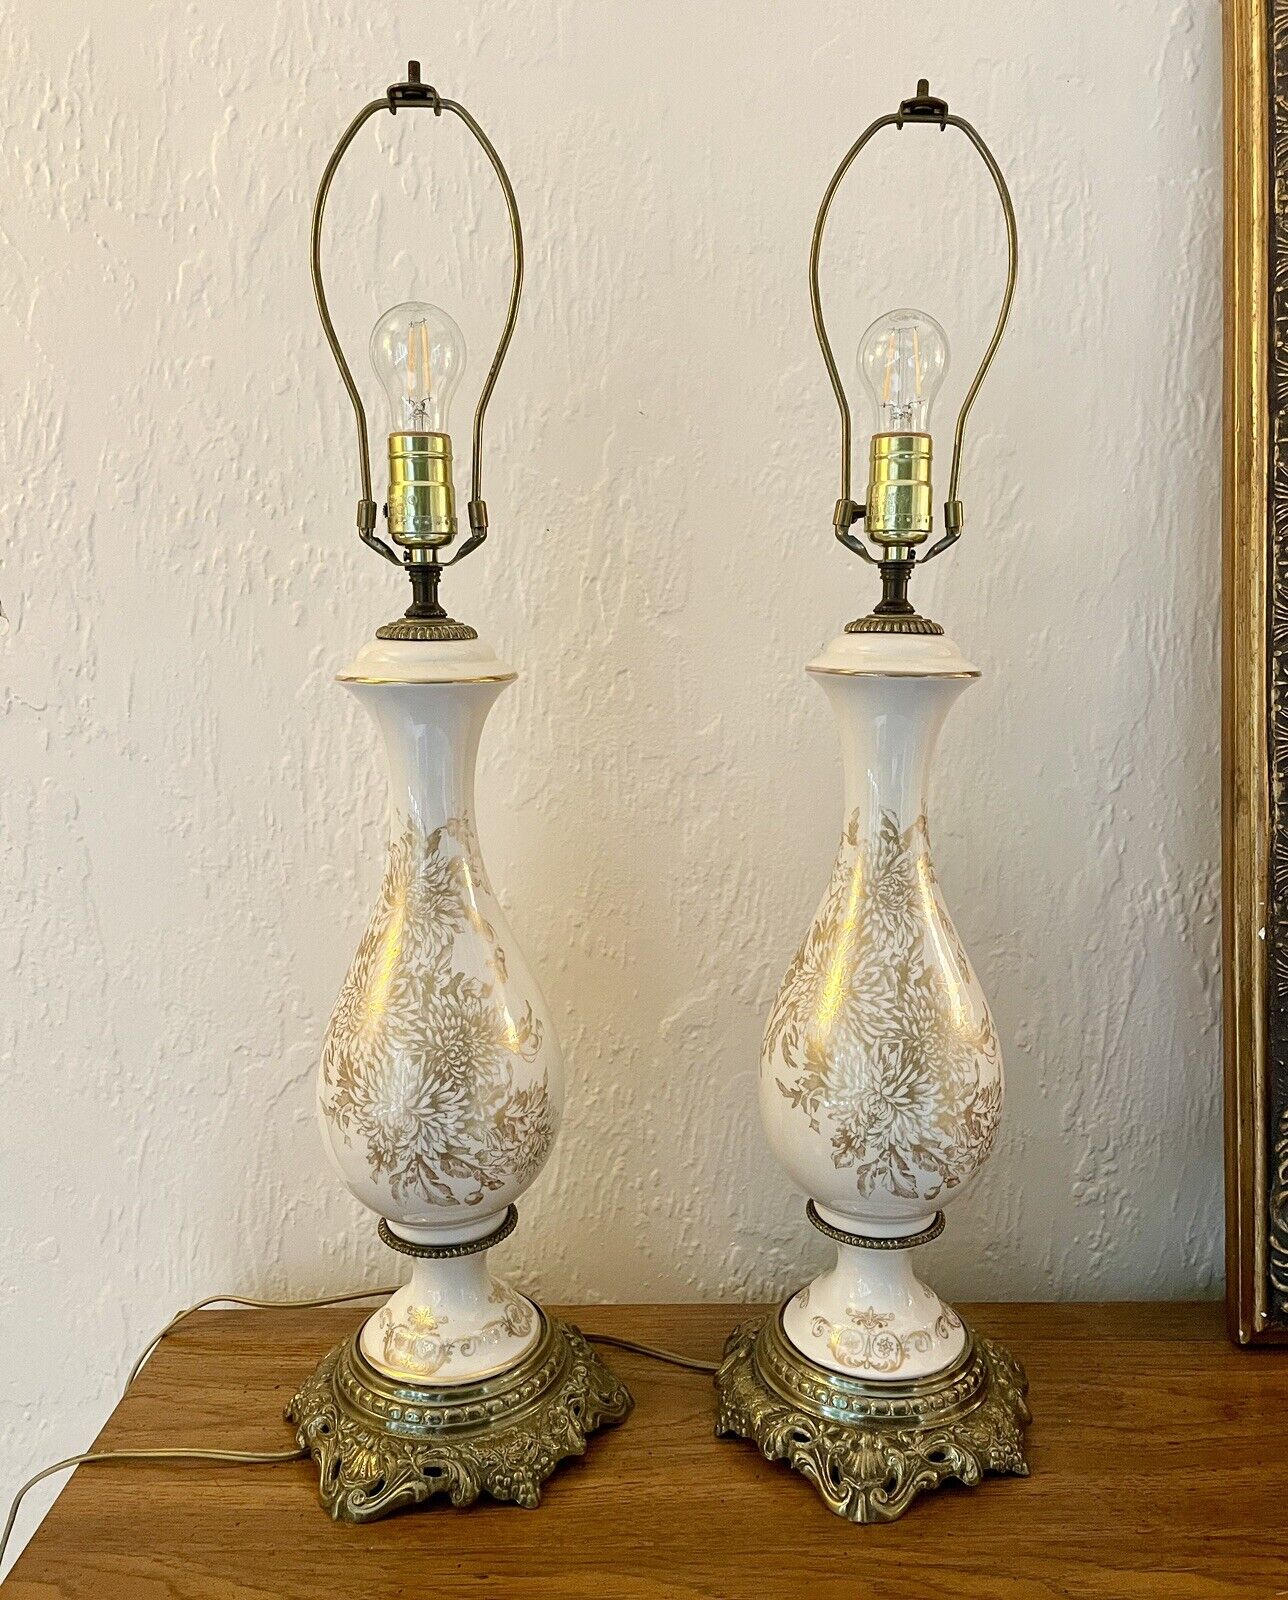 Pair Of Vintage Paul Hanson Porcelain And Brass Lamps With Gold Floral Detail